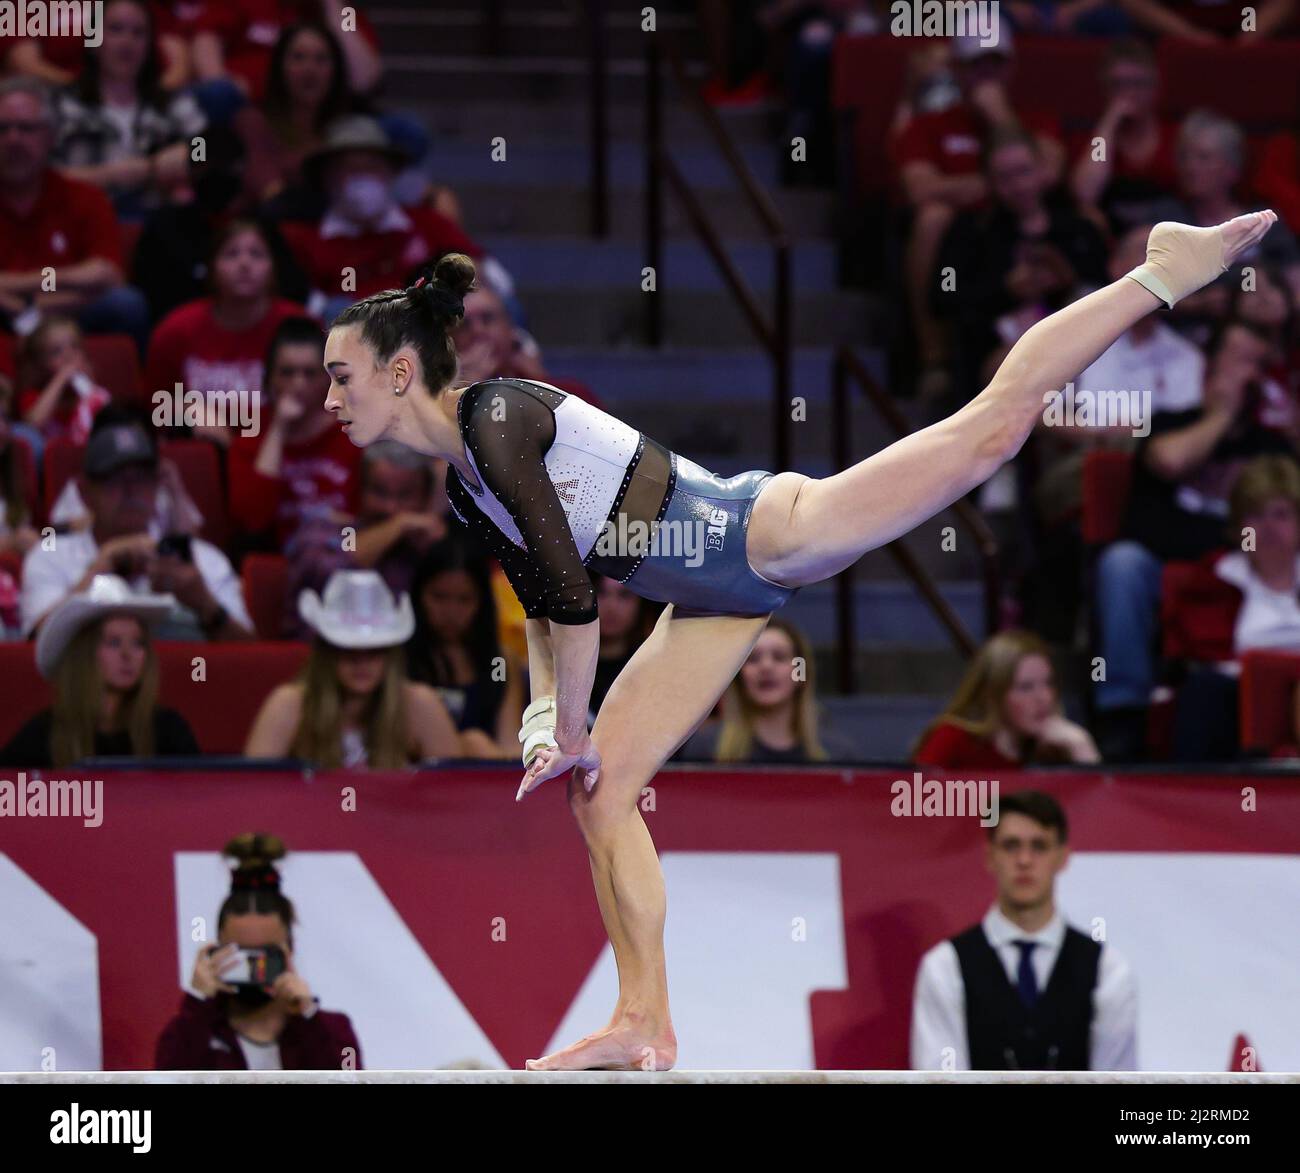 Norman, OK, USA. 2nd Apr, 2022. Minnesota's Ona Loper performs on the balance beam during the Finals of the NCAA Women's Gymnastics Norman Regional at the Lloyd Noble Center in Norman, OK. Kyle Okita/CSM/Alamy Live News Stock Photo